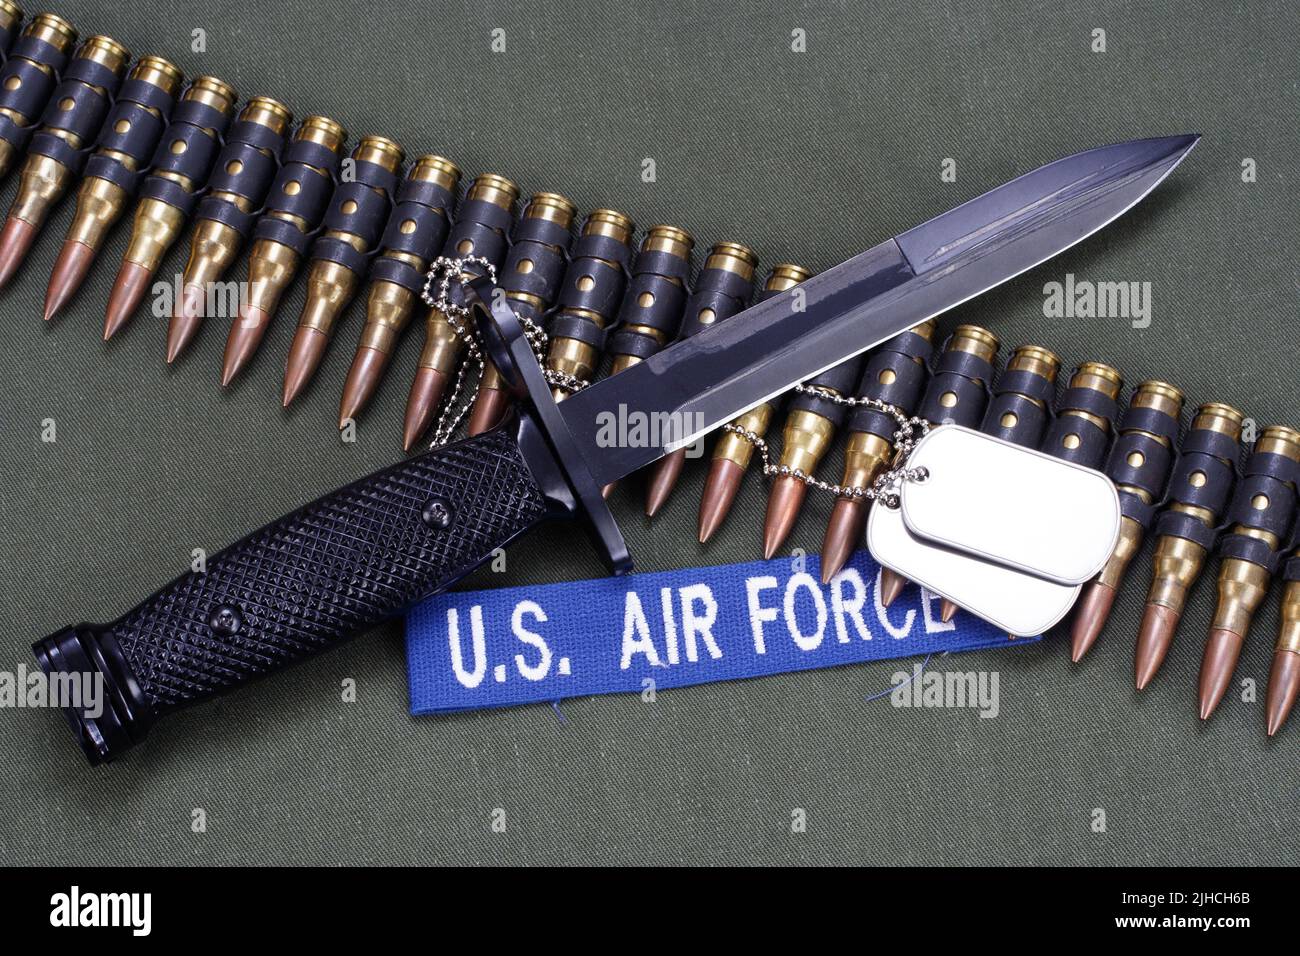 US AIR FORCE uniform with bayonet, dog tags and ammunition belt Stock Photo